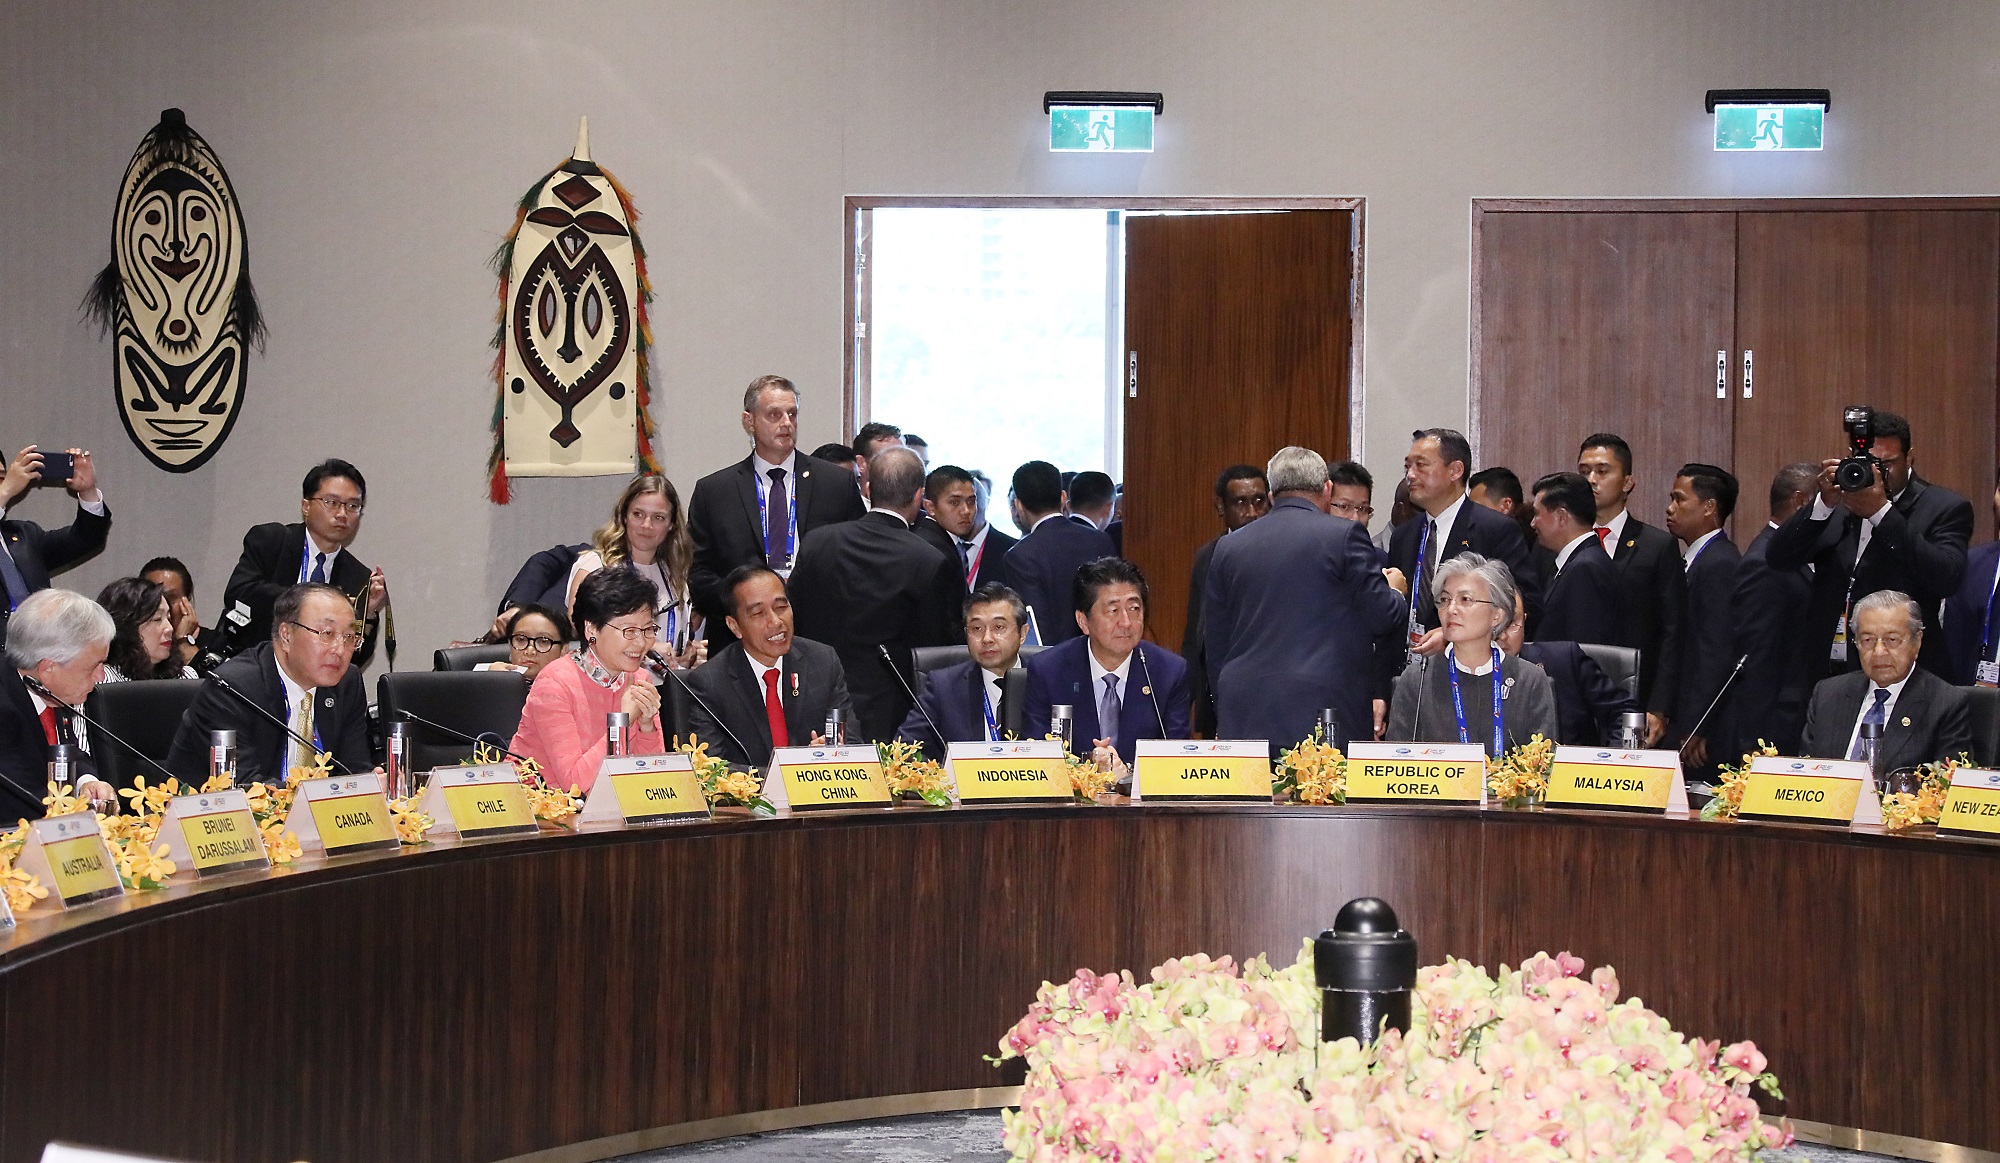 Photograph of the APEC Leaders’ Dialogue with Pacific Island Leaders